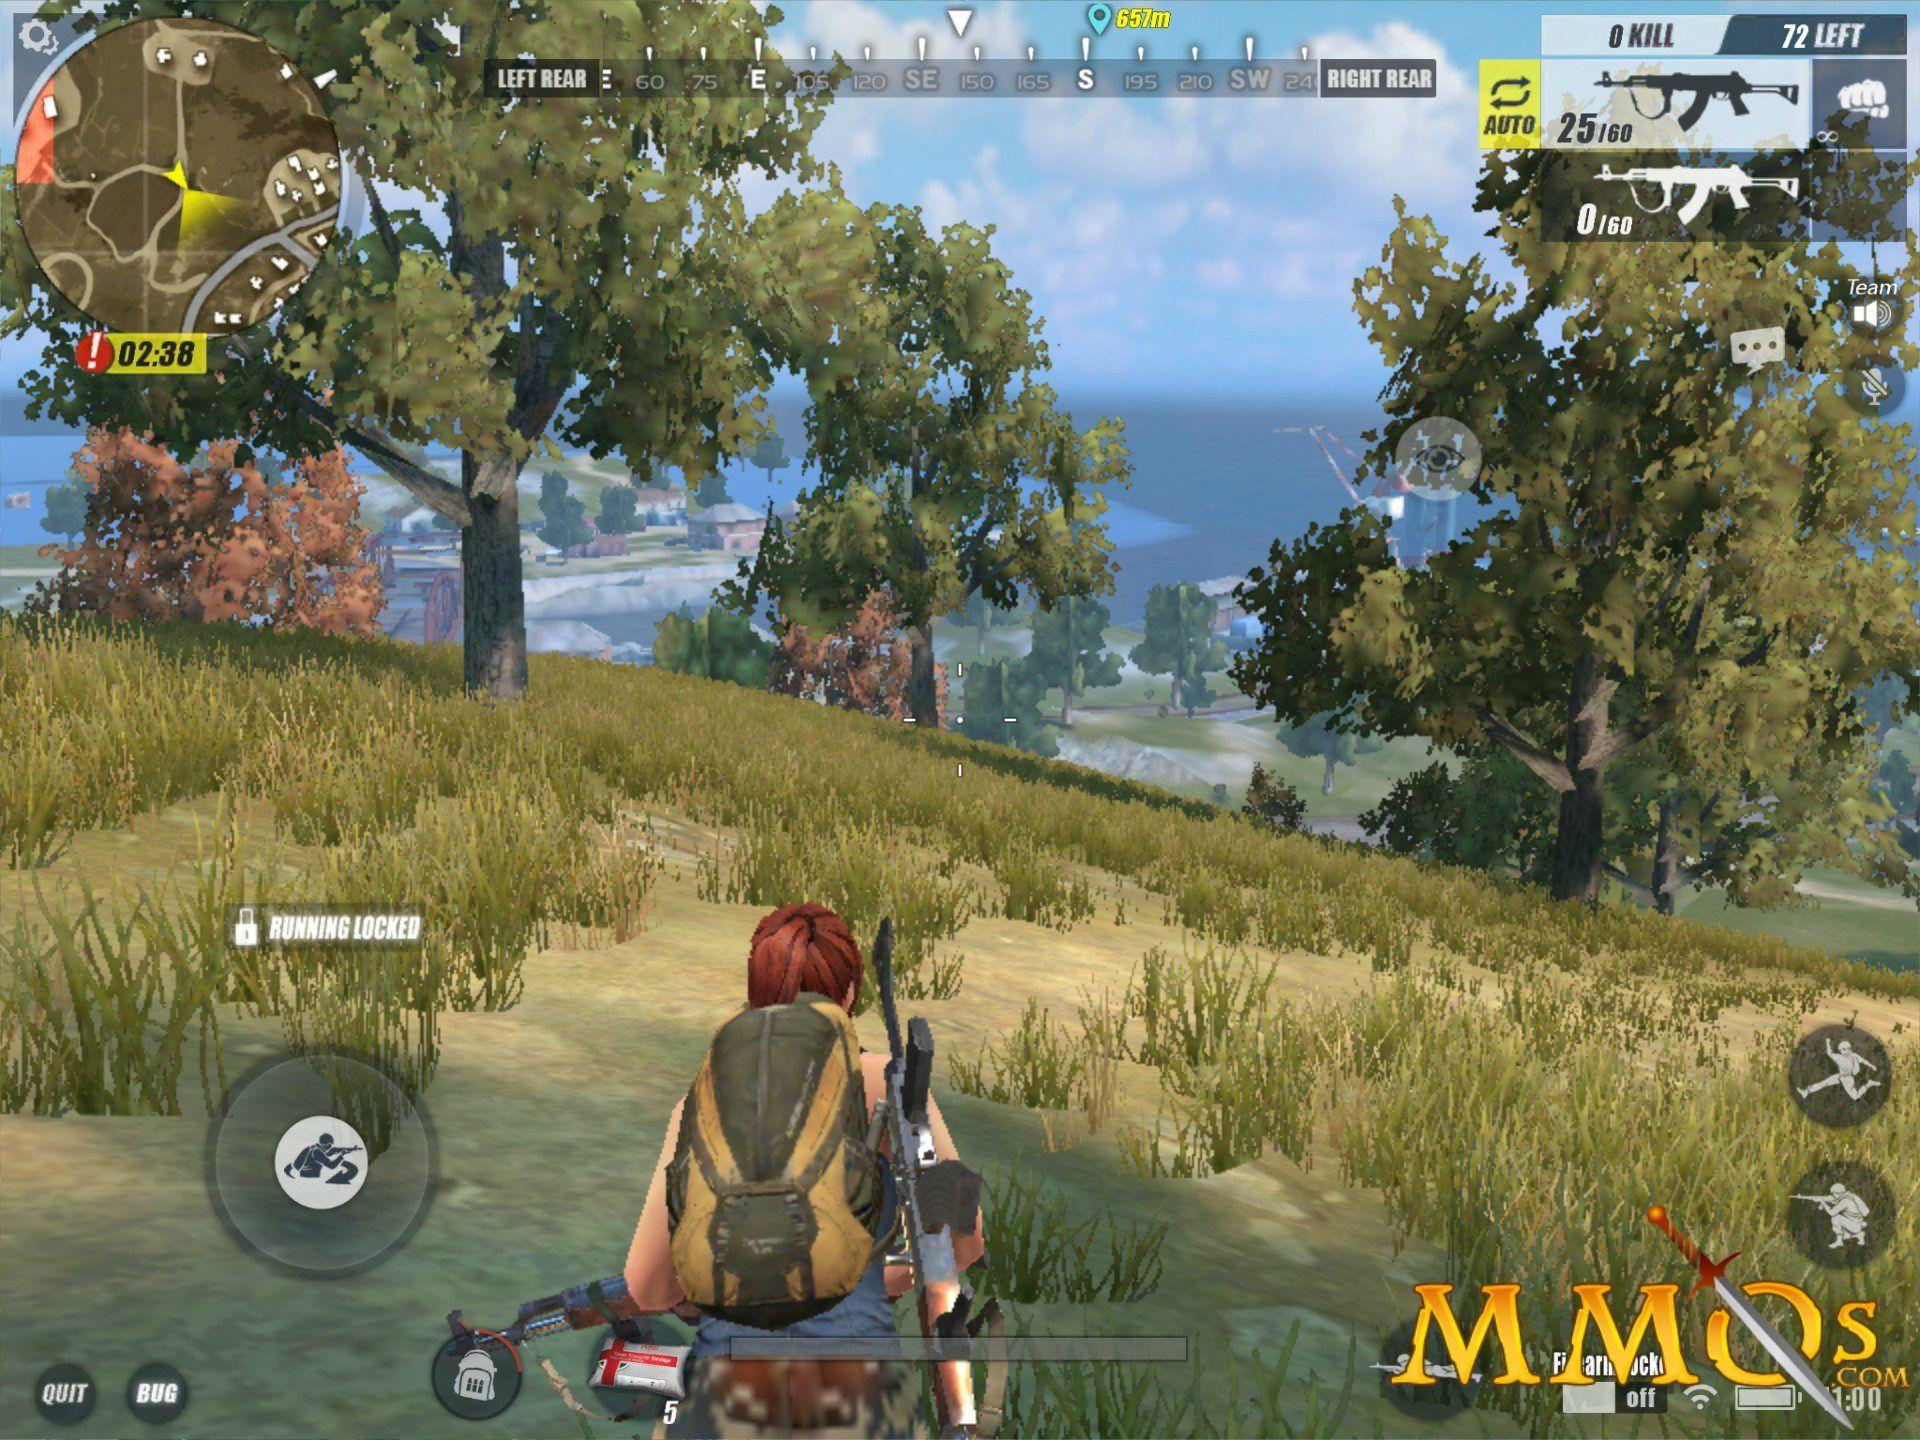 how to download rules of survival on mac